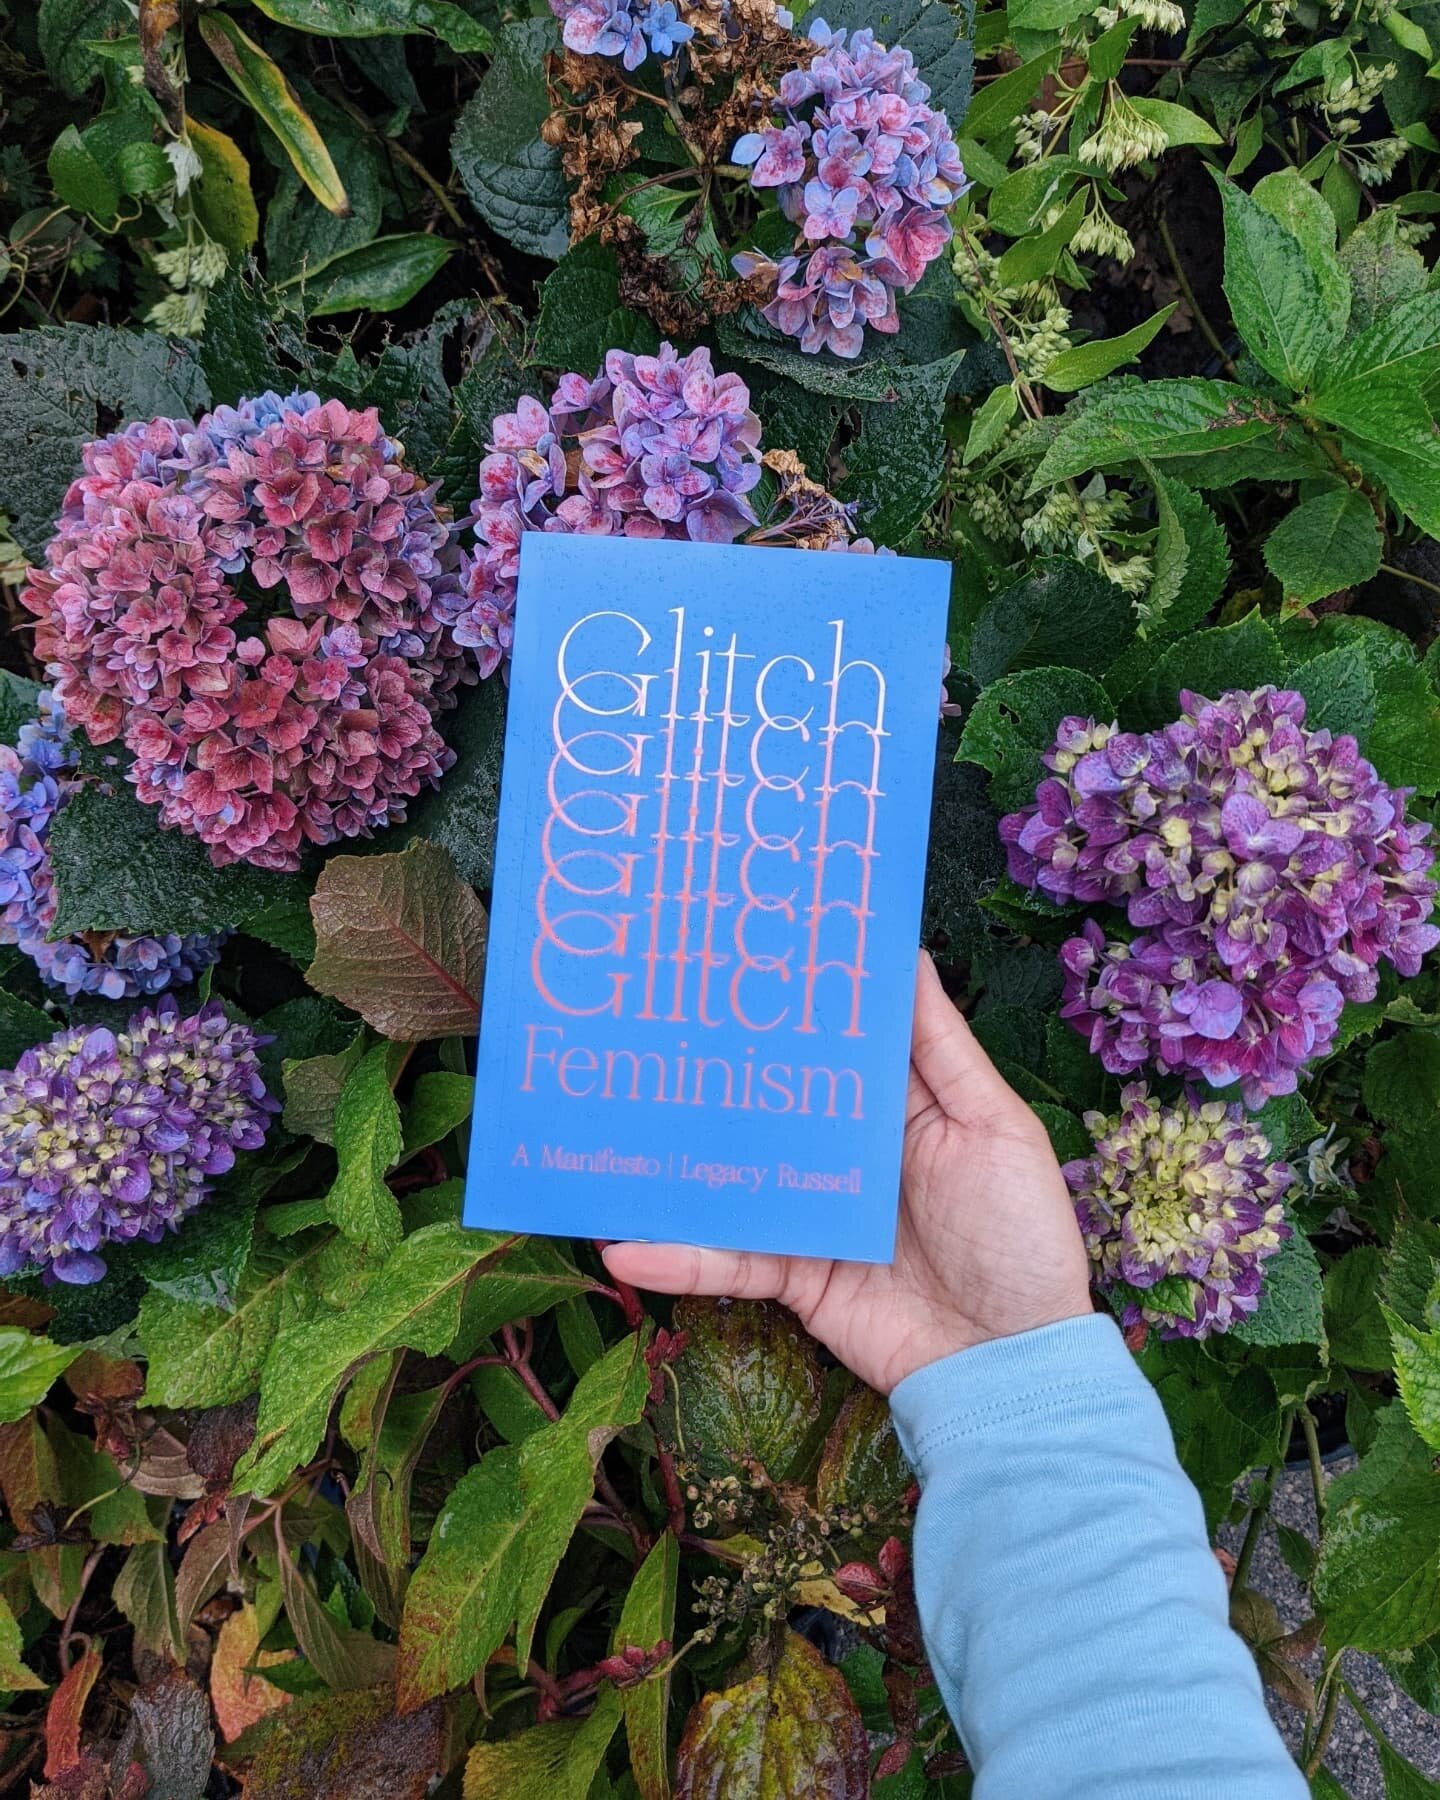 hello! i have a review out today of legacy russell's (@ellerustle) art criticism x manifesto essay collection Glitch Feminism (published by @versobooks) on @femmeartreview at FemmeArtReview.com/Reviews &mdash; link is also in my bio! 🥰🌈🌌 
⠀⠀⠀⠀⠀⠀⠀⠀